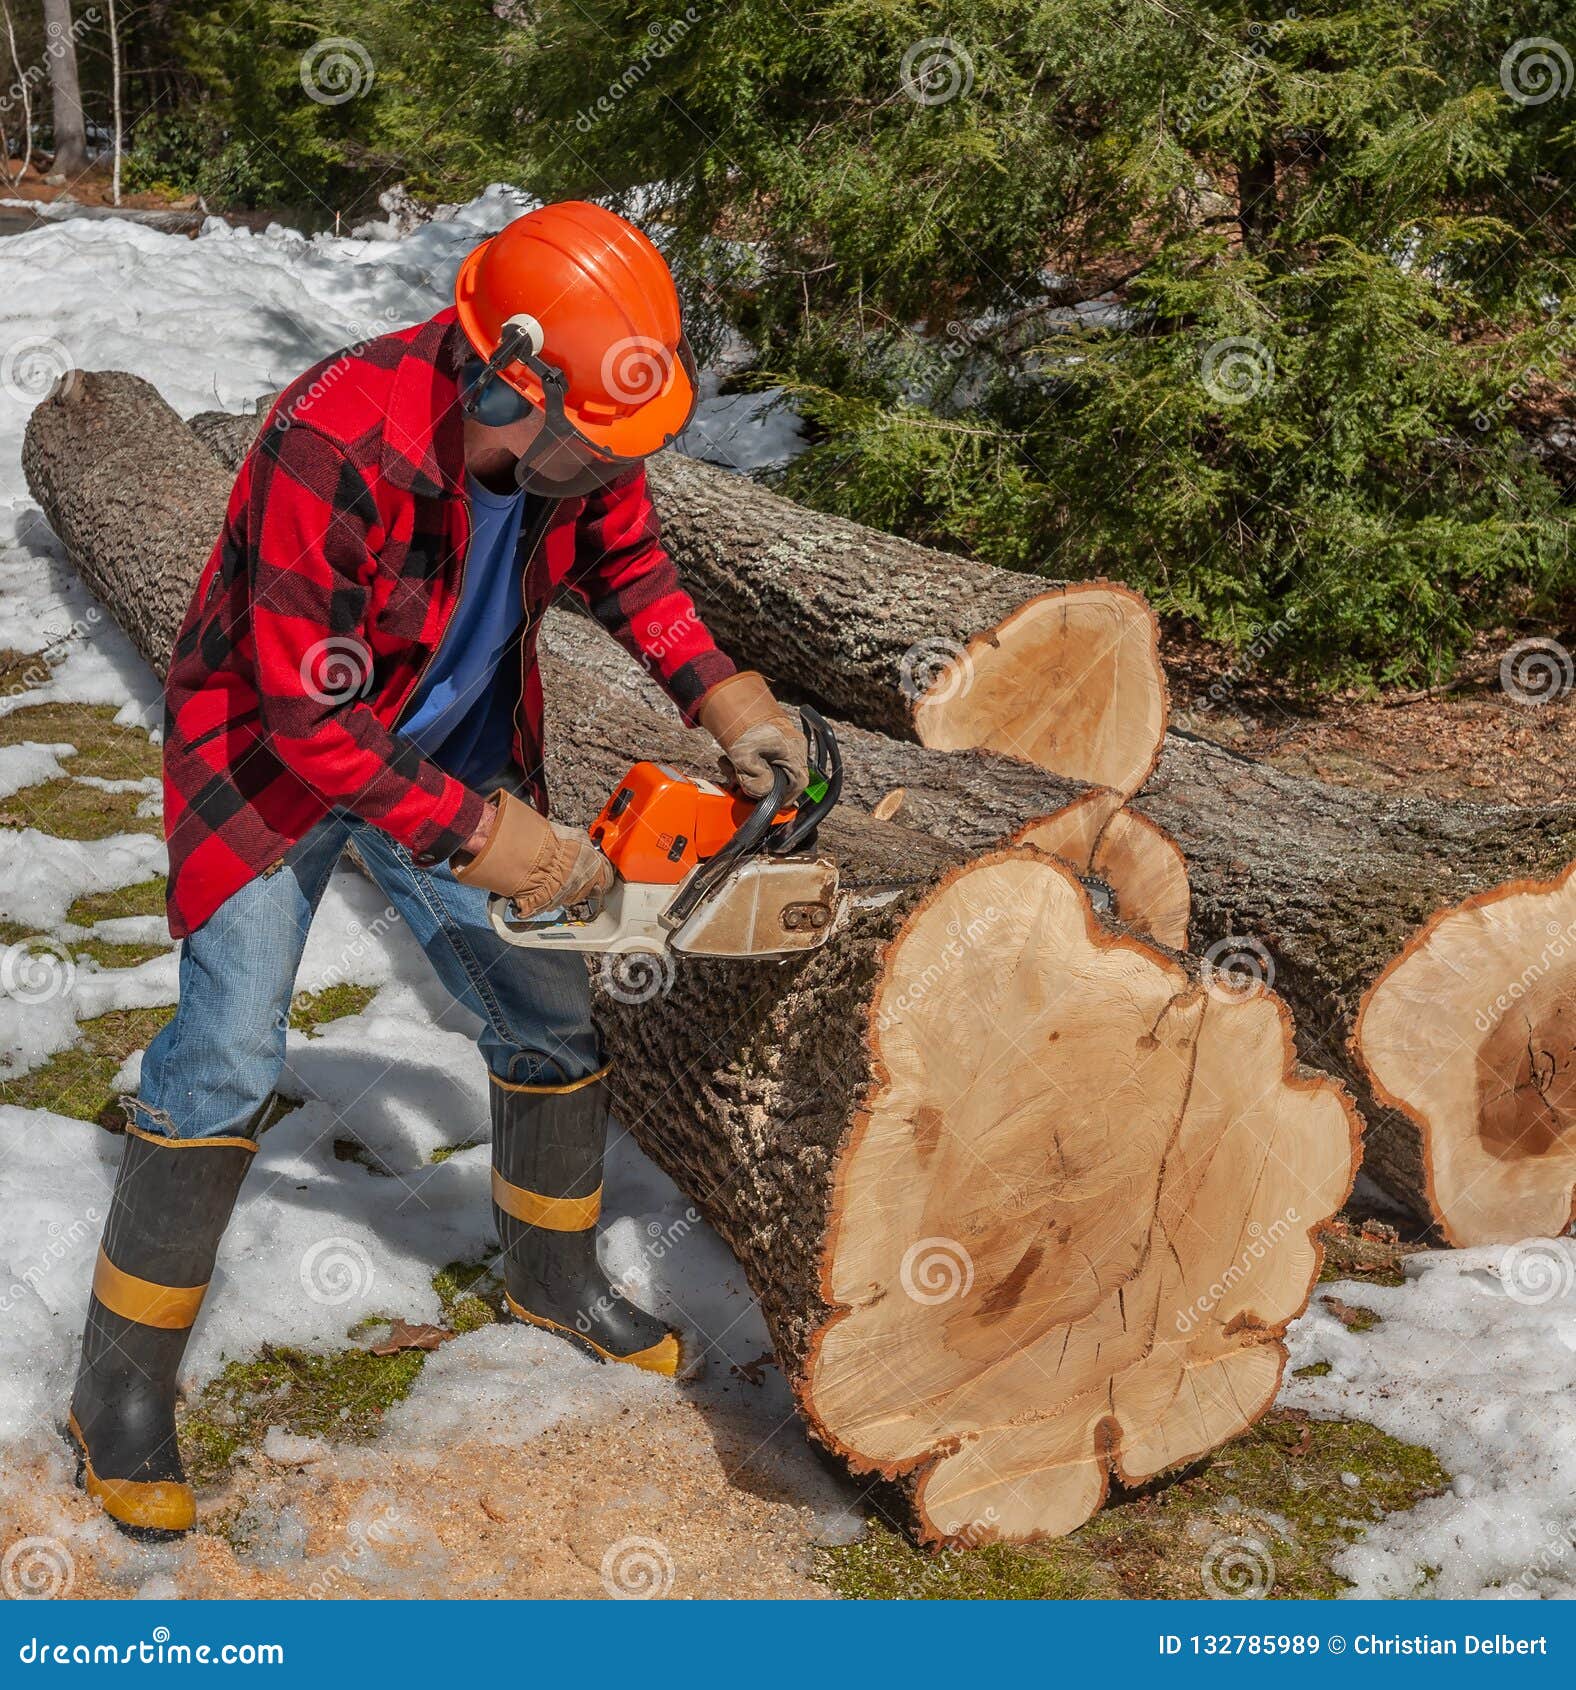 Learn to Cut Firewood: Confessions of a Homestead Woodcutter